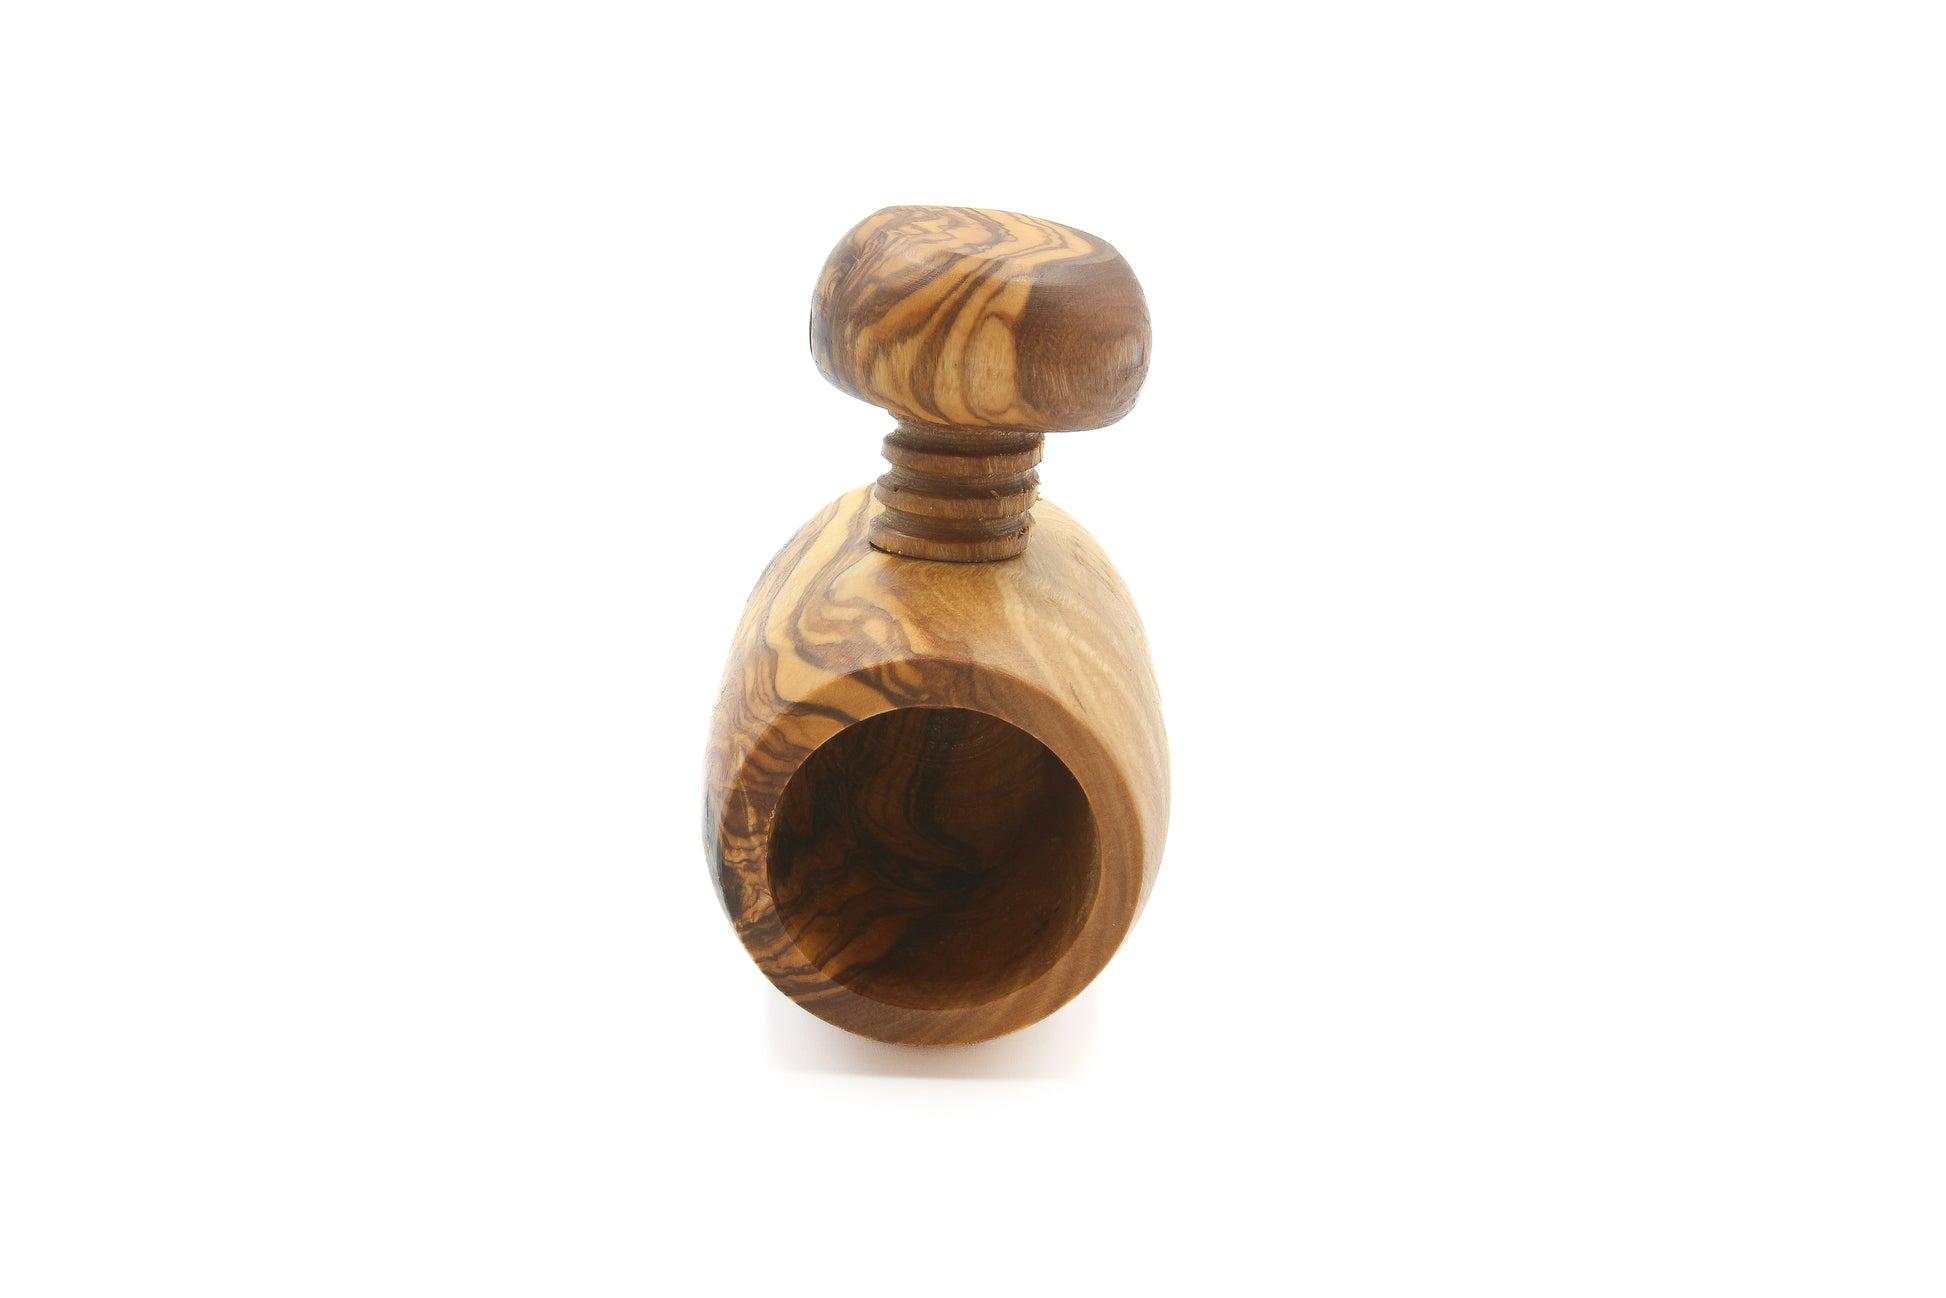 Rustic olive wood nutcracker for your kitchen